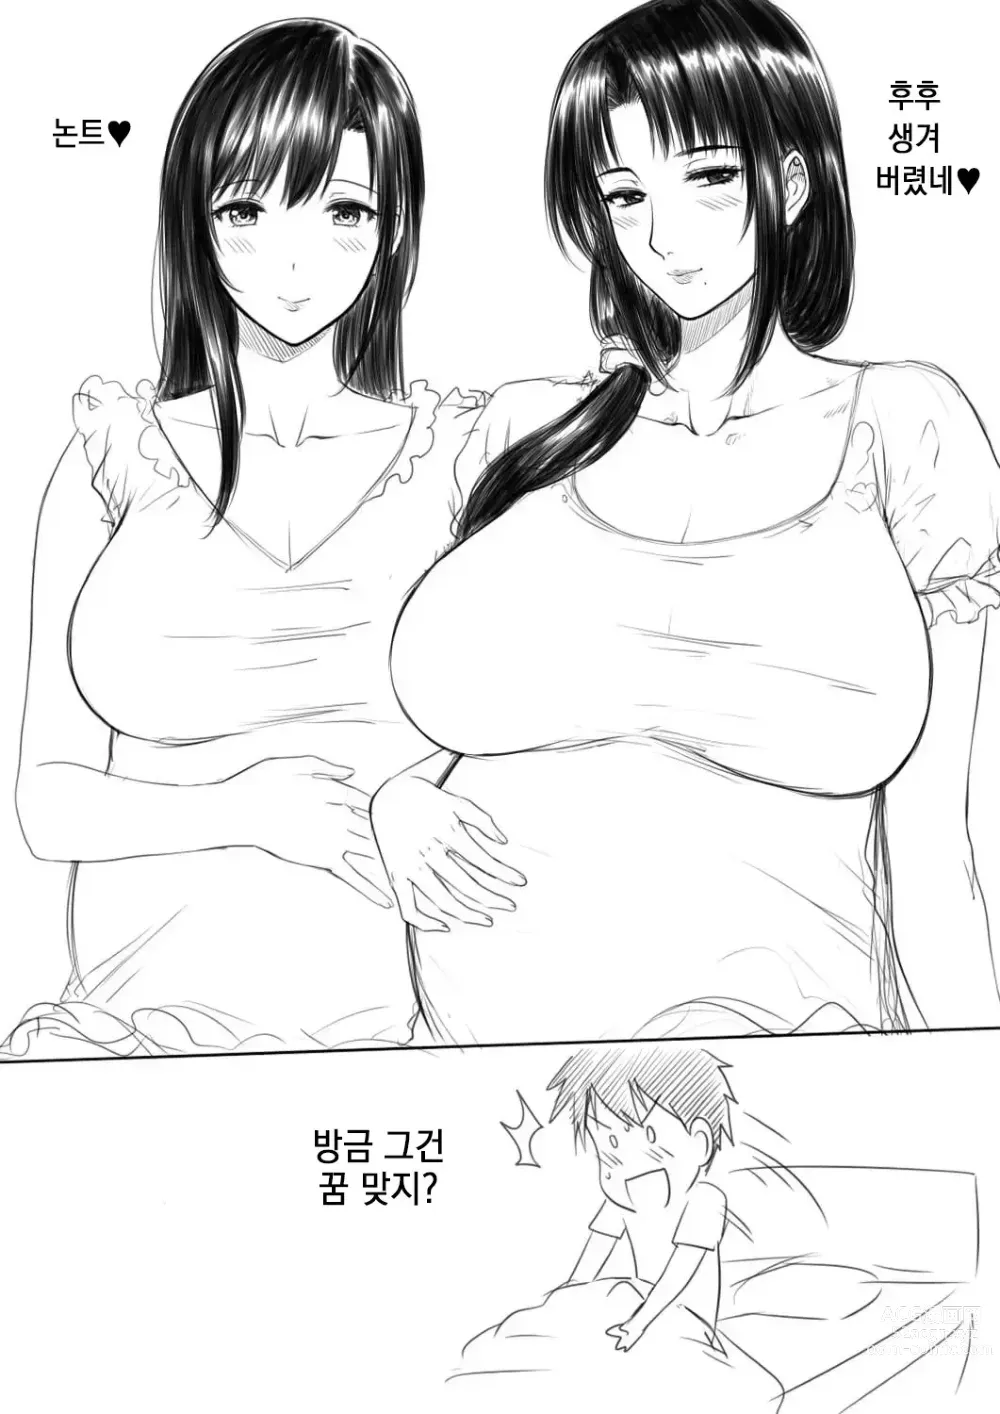 Page 45 of manga My Mother prototype ｜ My Mother 프로토타입